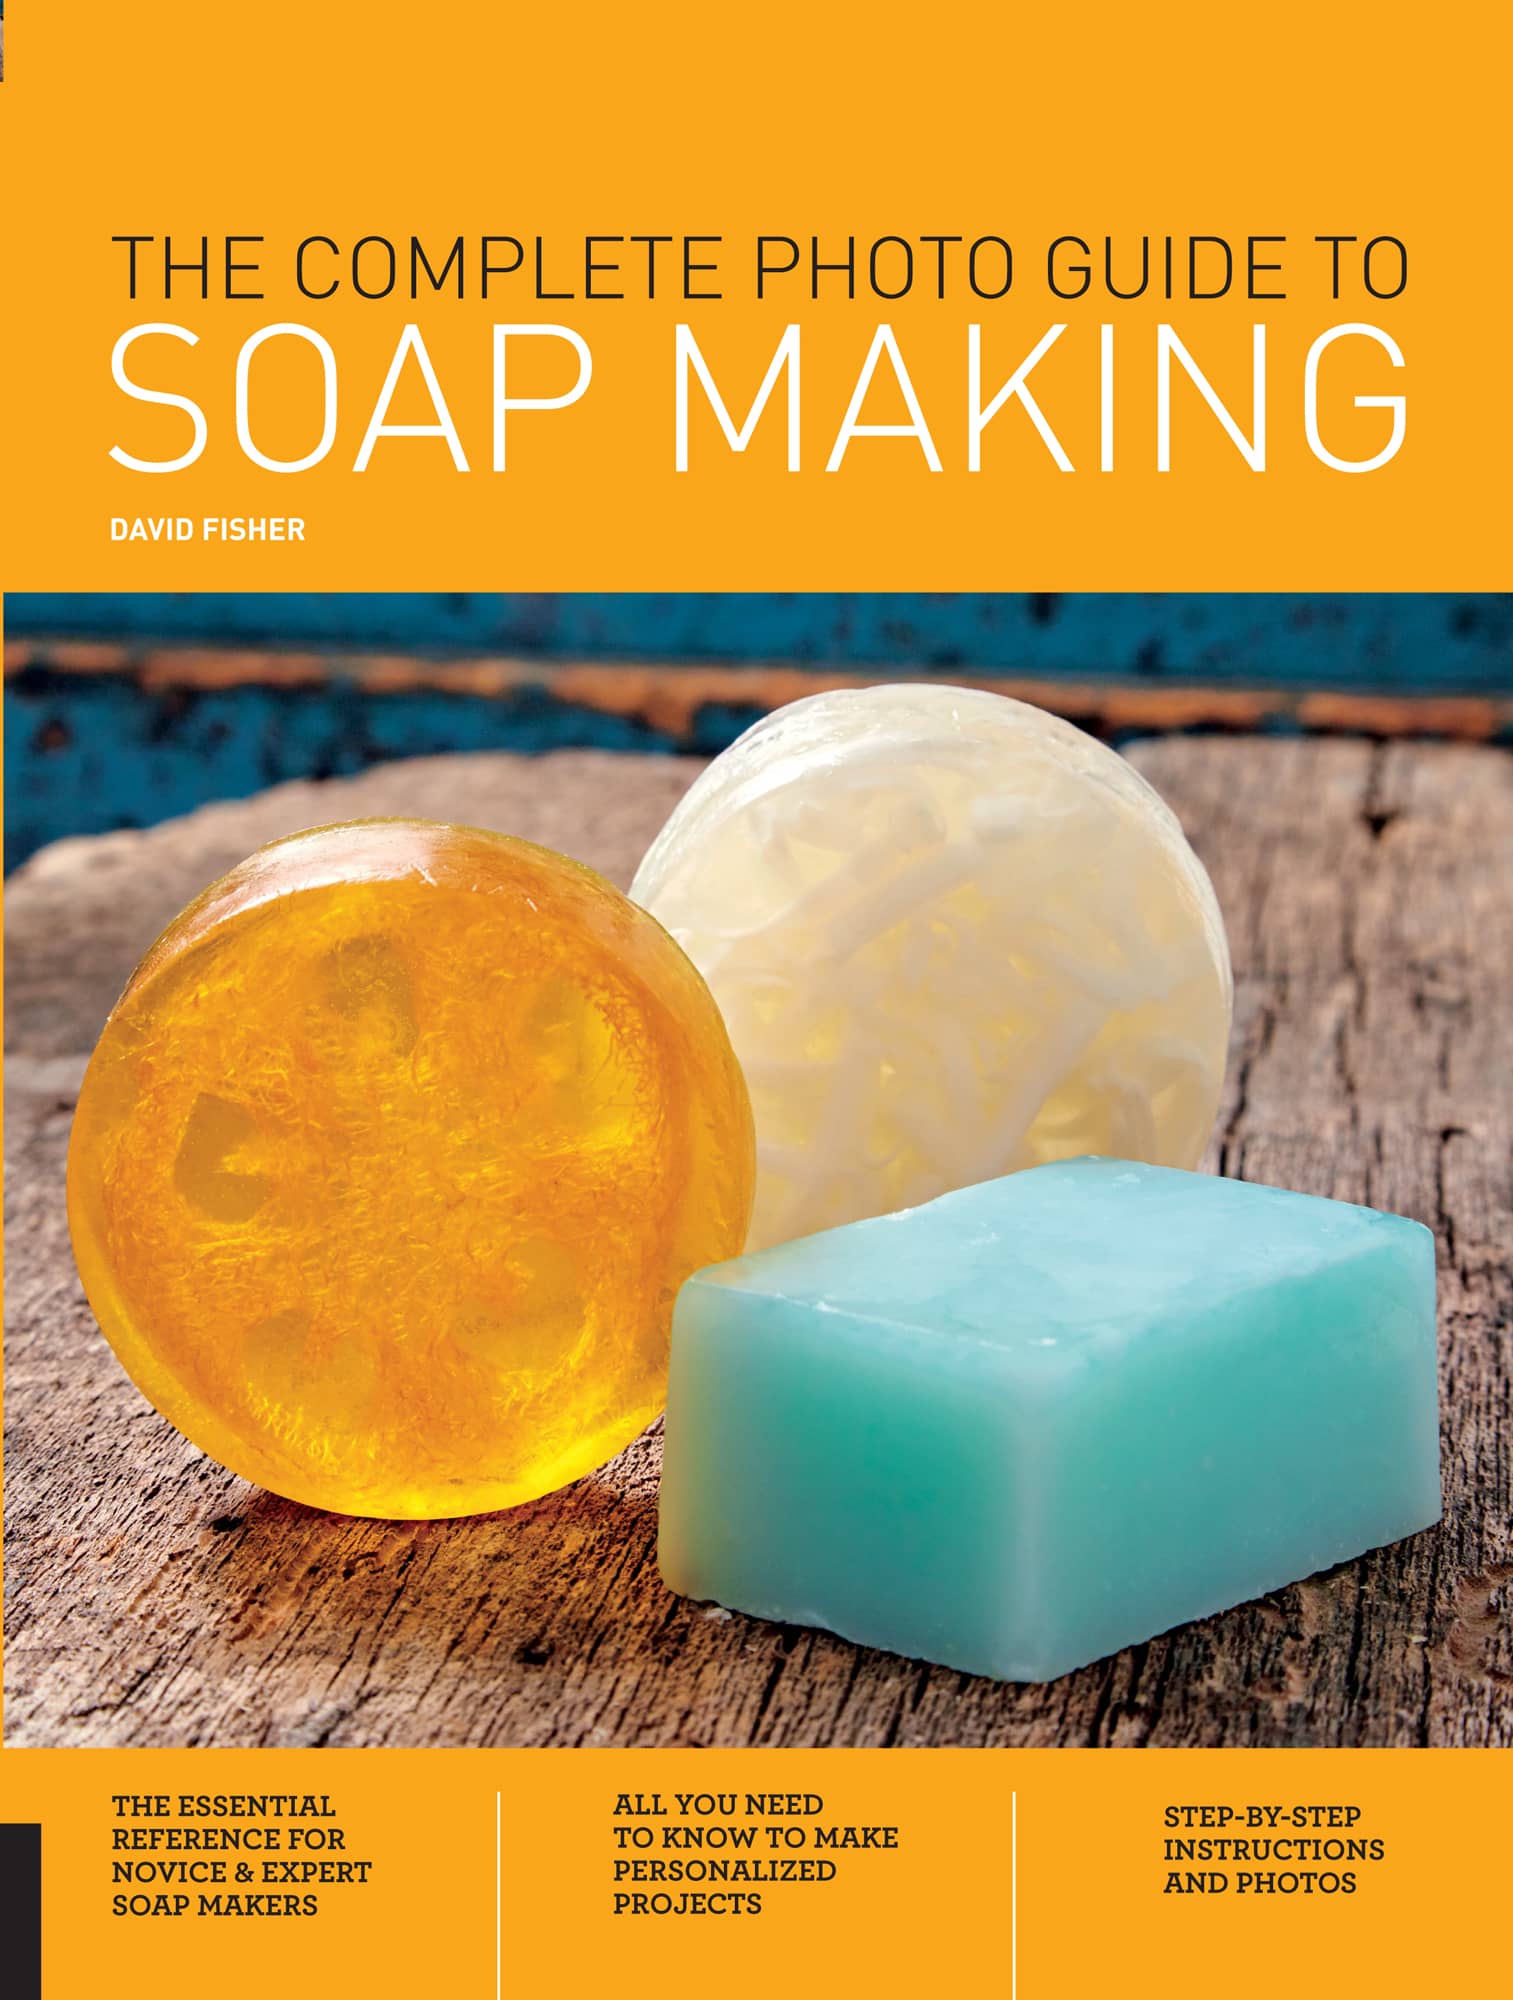 THE COMPLETE PHOTO GUIDE TO SOAP MAKING DAVID FISHER Introduction - photo 1